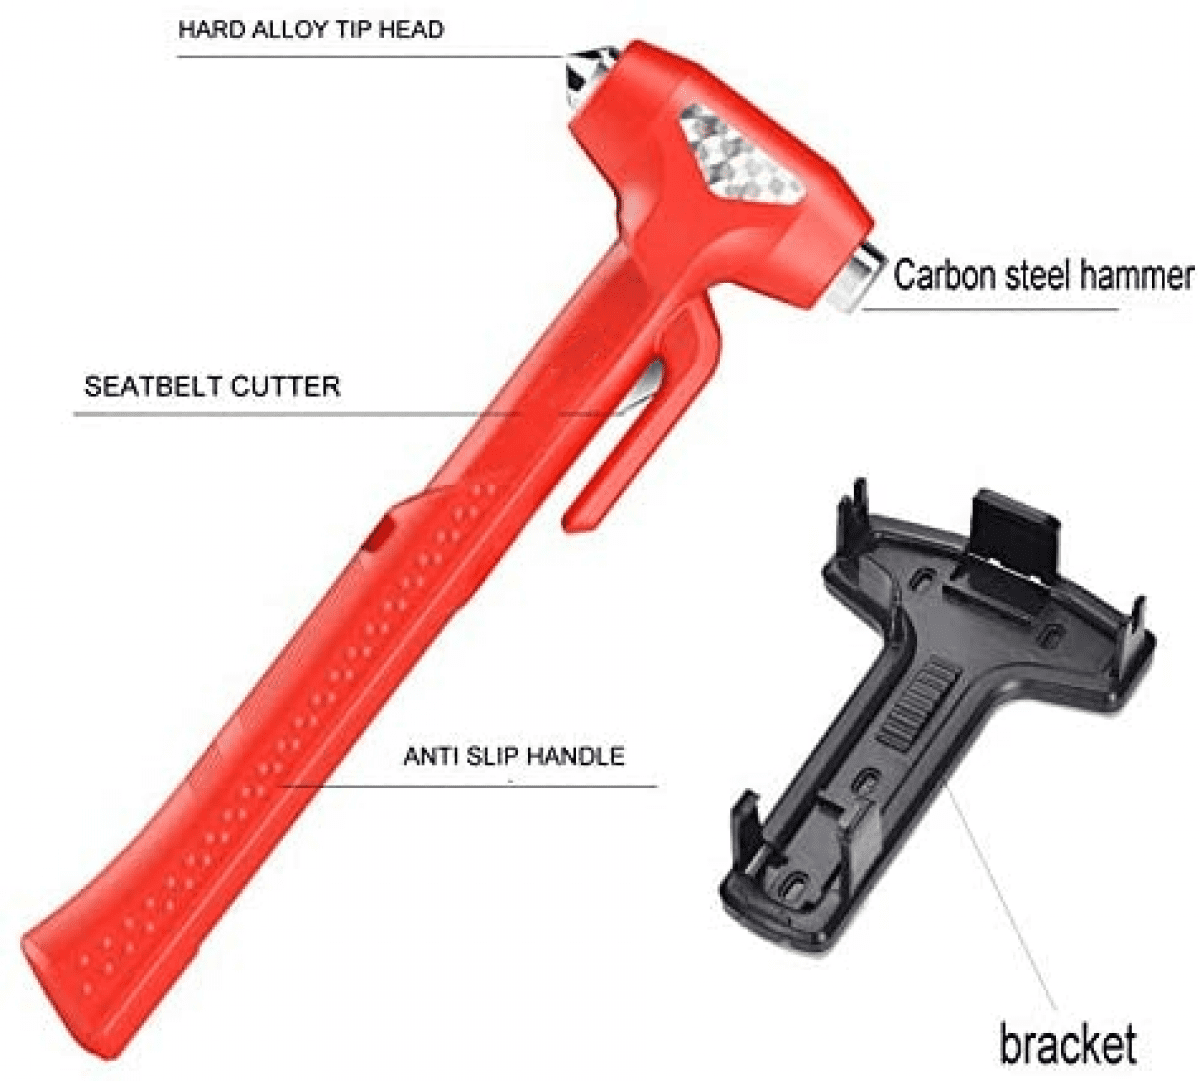 Car Glass breaker - Premium Car Safety Hammer - Emergency Escape Tool with Windows  Breaker and Seatbelt Cutter, Life Saving Survival Kit 